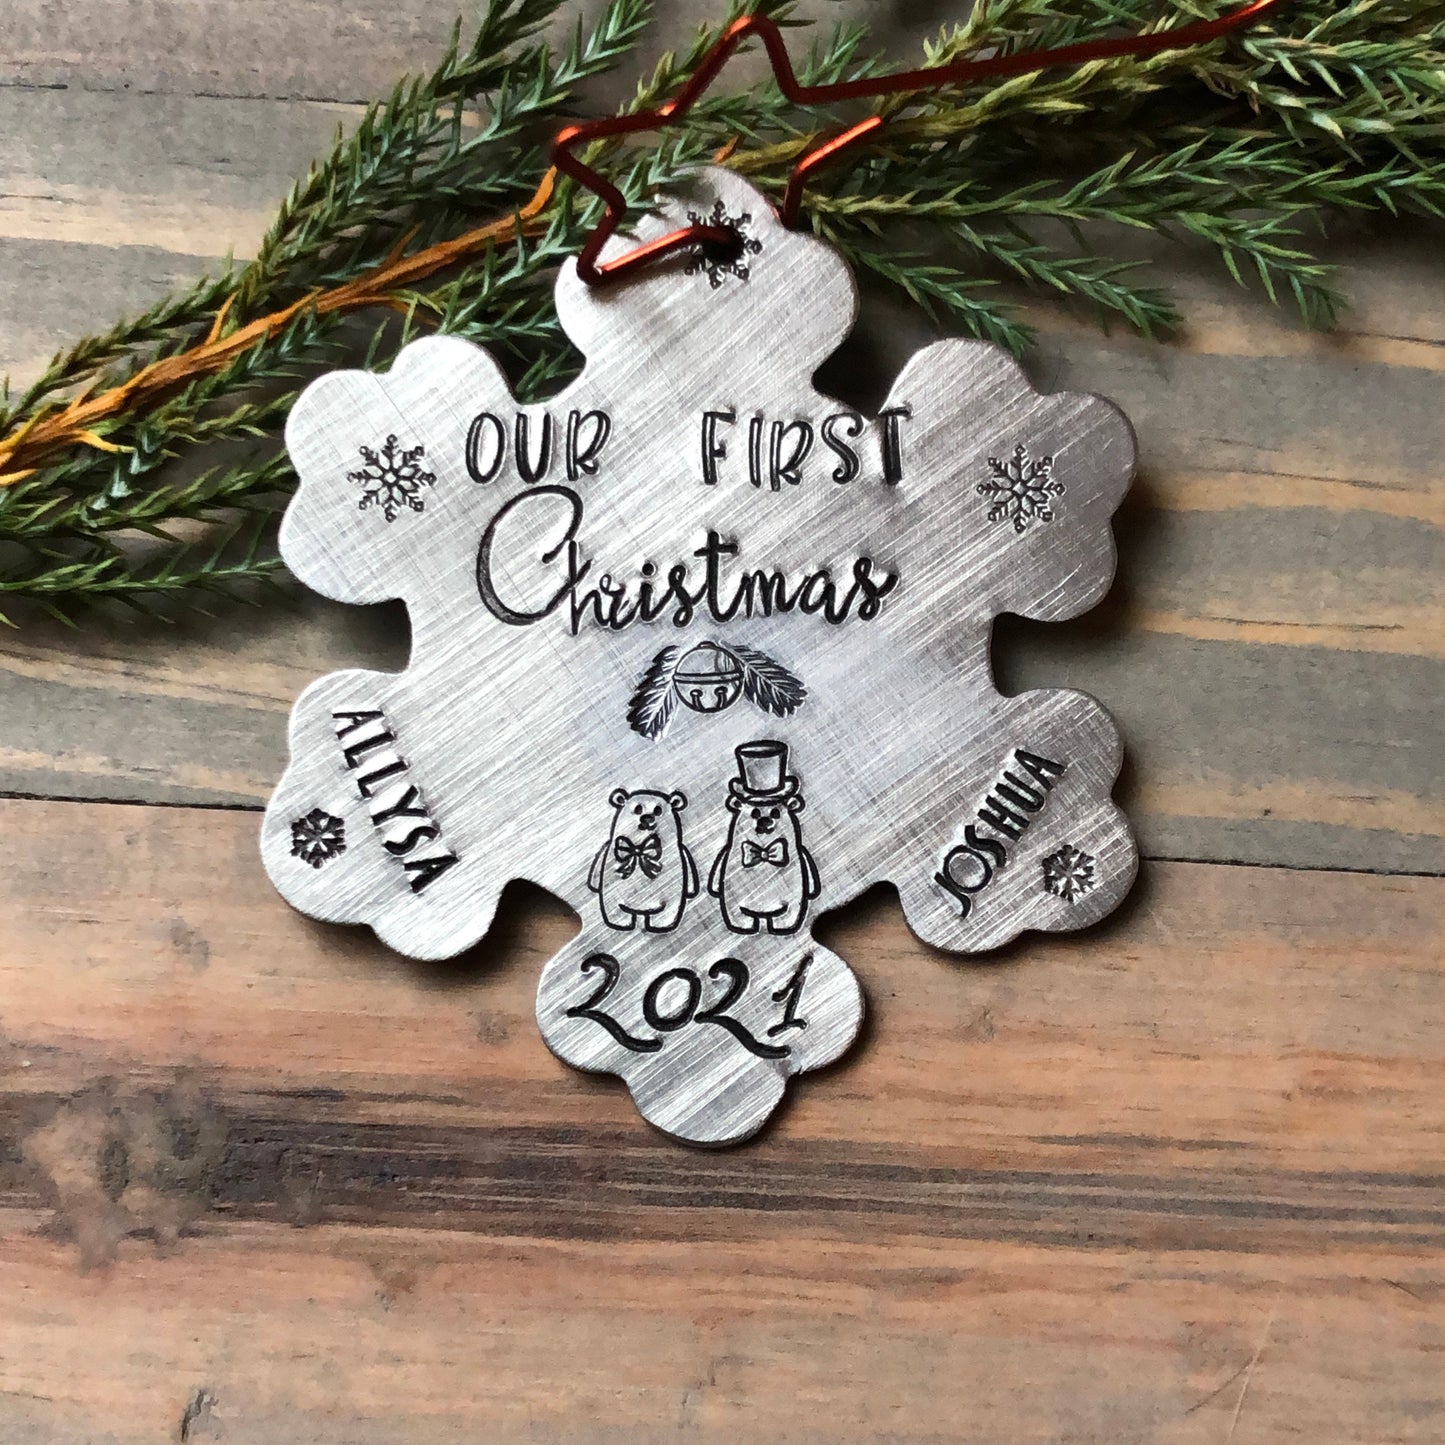 First Christmas Together, 1st Married Christmas, Ornament for Newlyweds, Our First Christmas, Christmas Bears, Gift for First Christmas